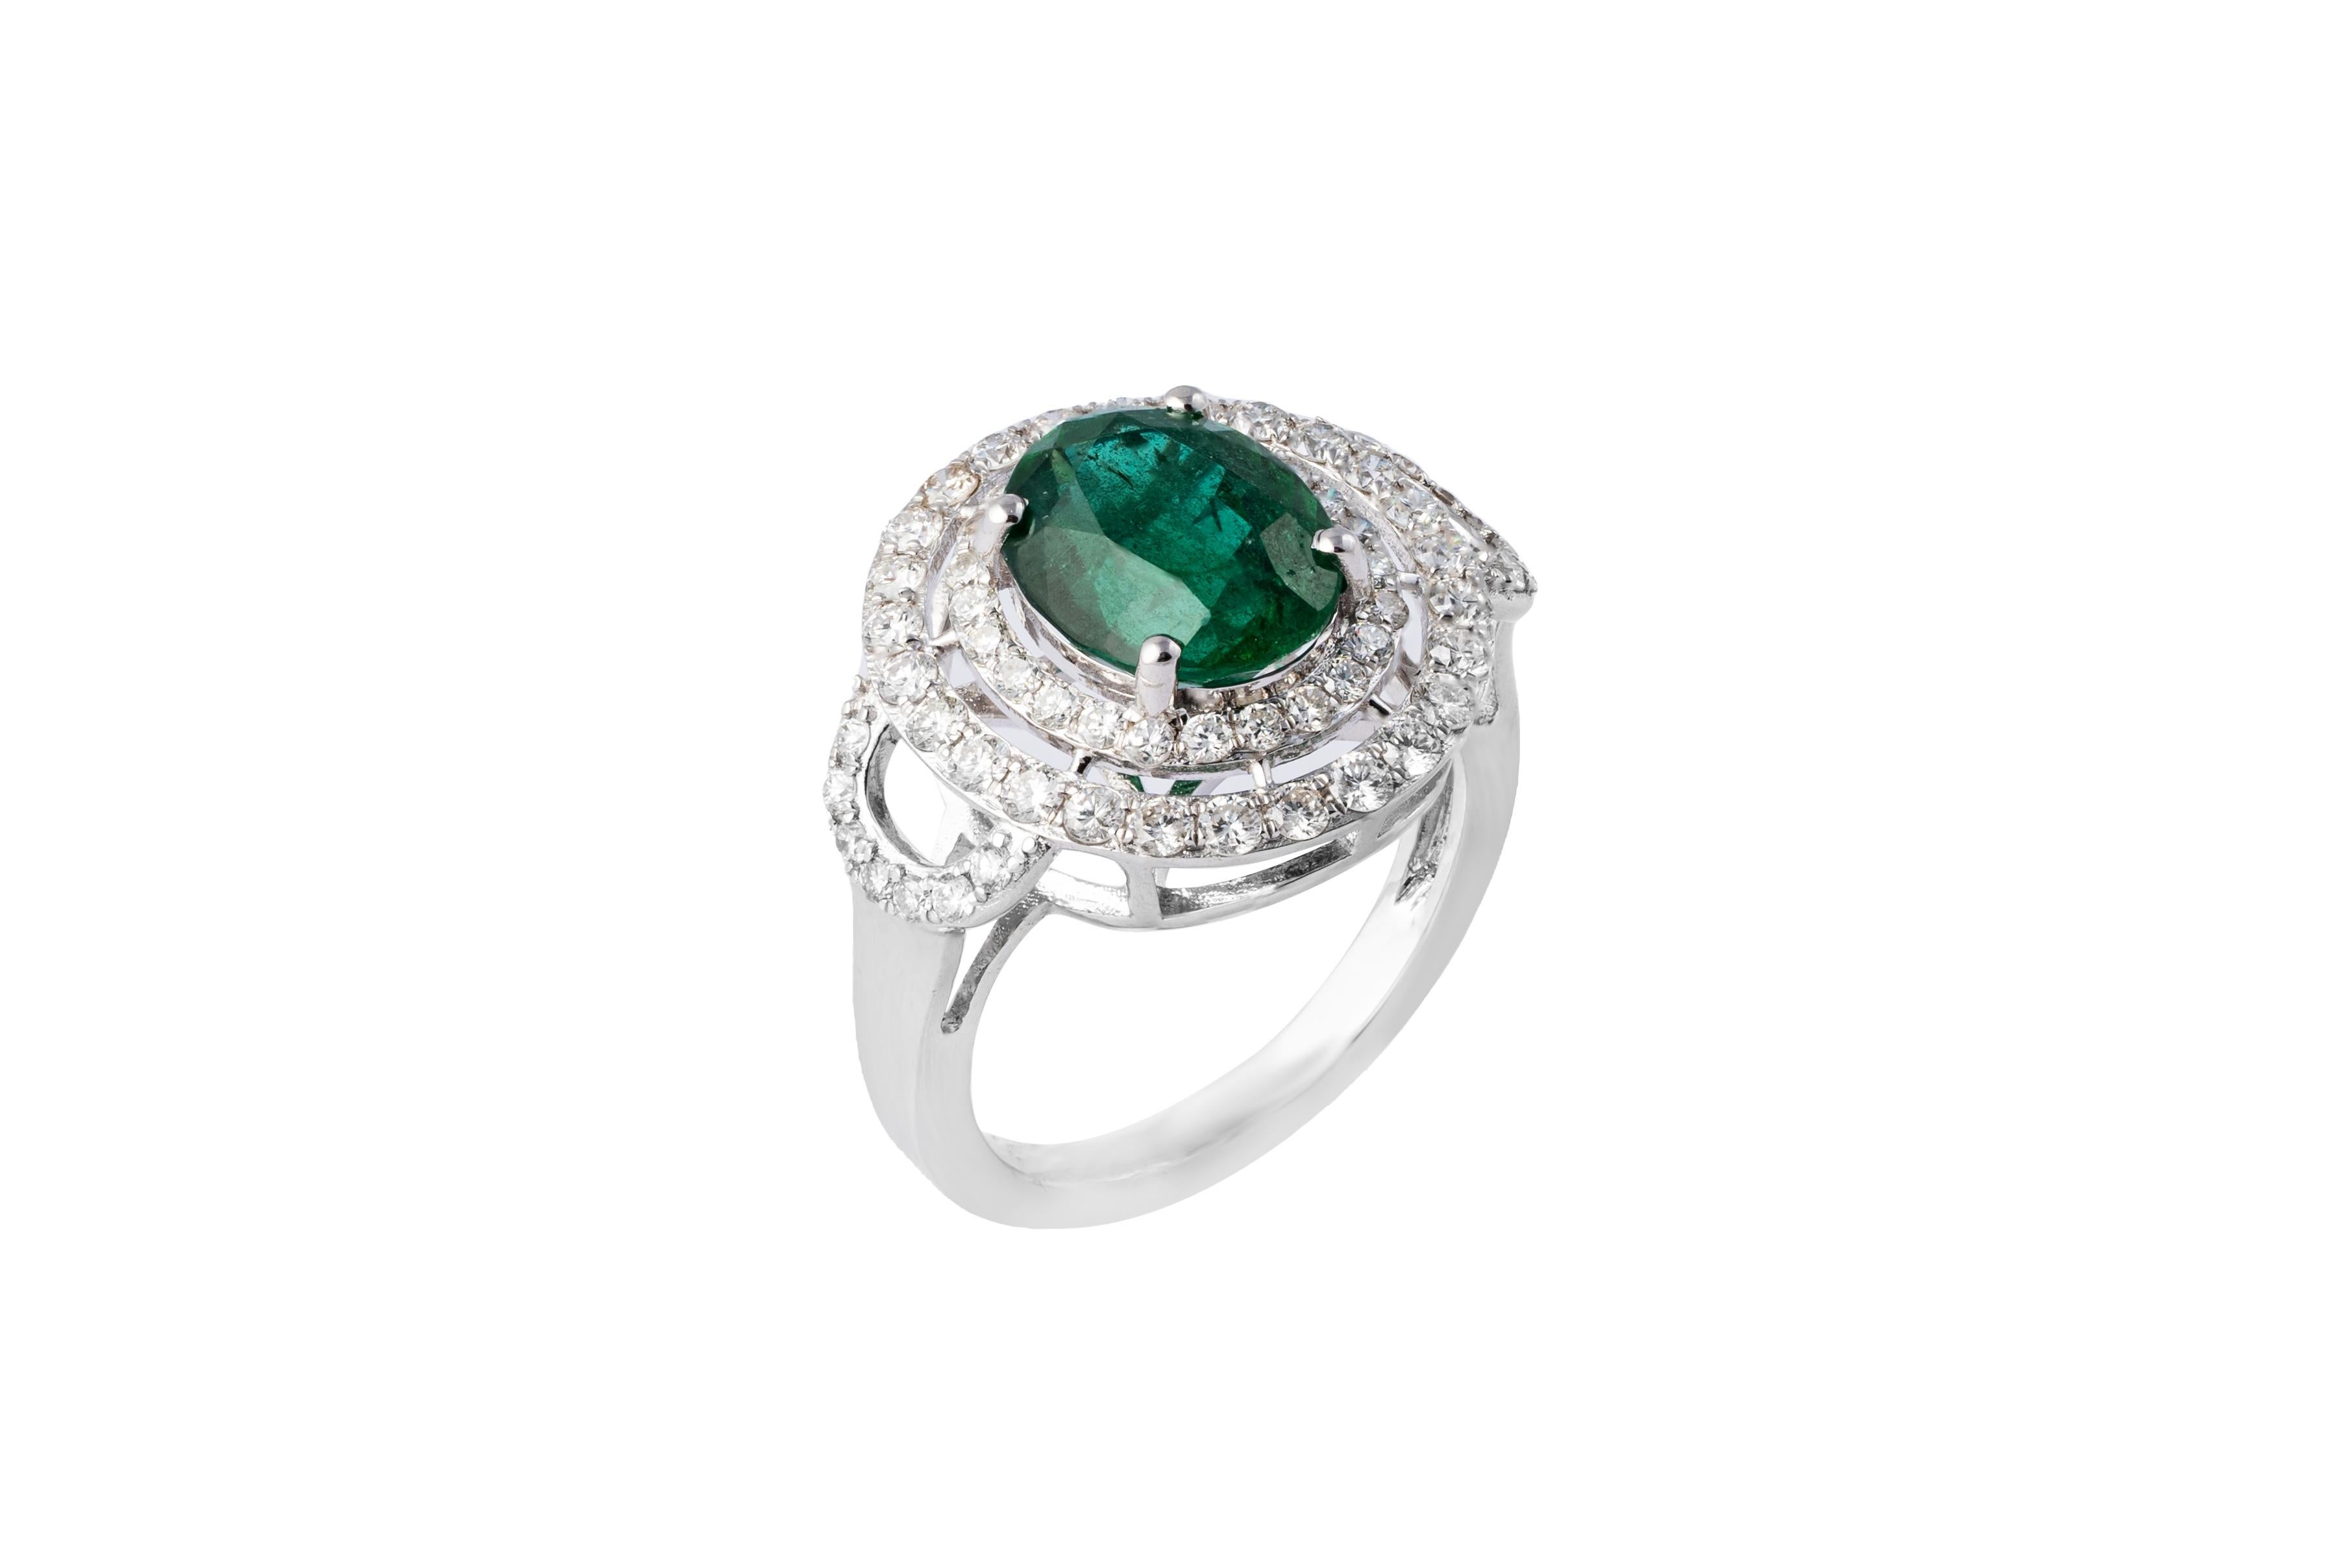 Emerald Cut Natural Zambian Emerald Ring with Diamonds and 14k Gold For Sale